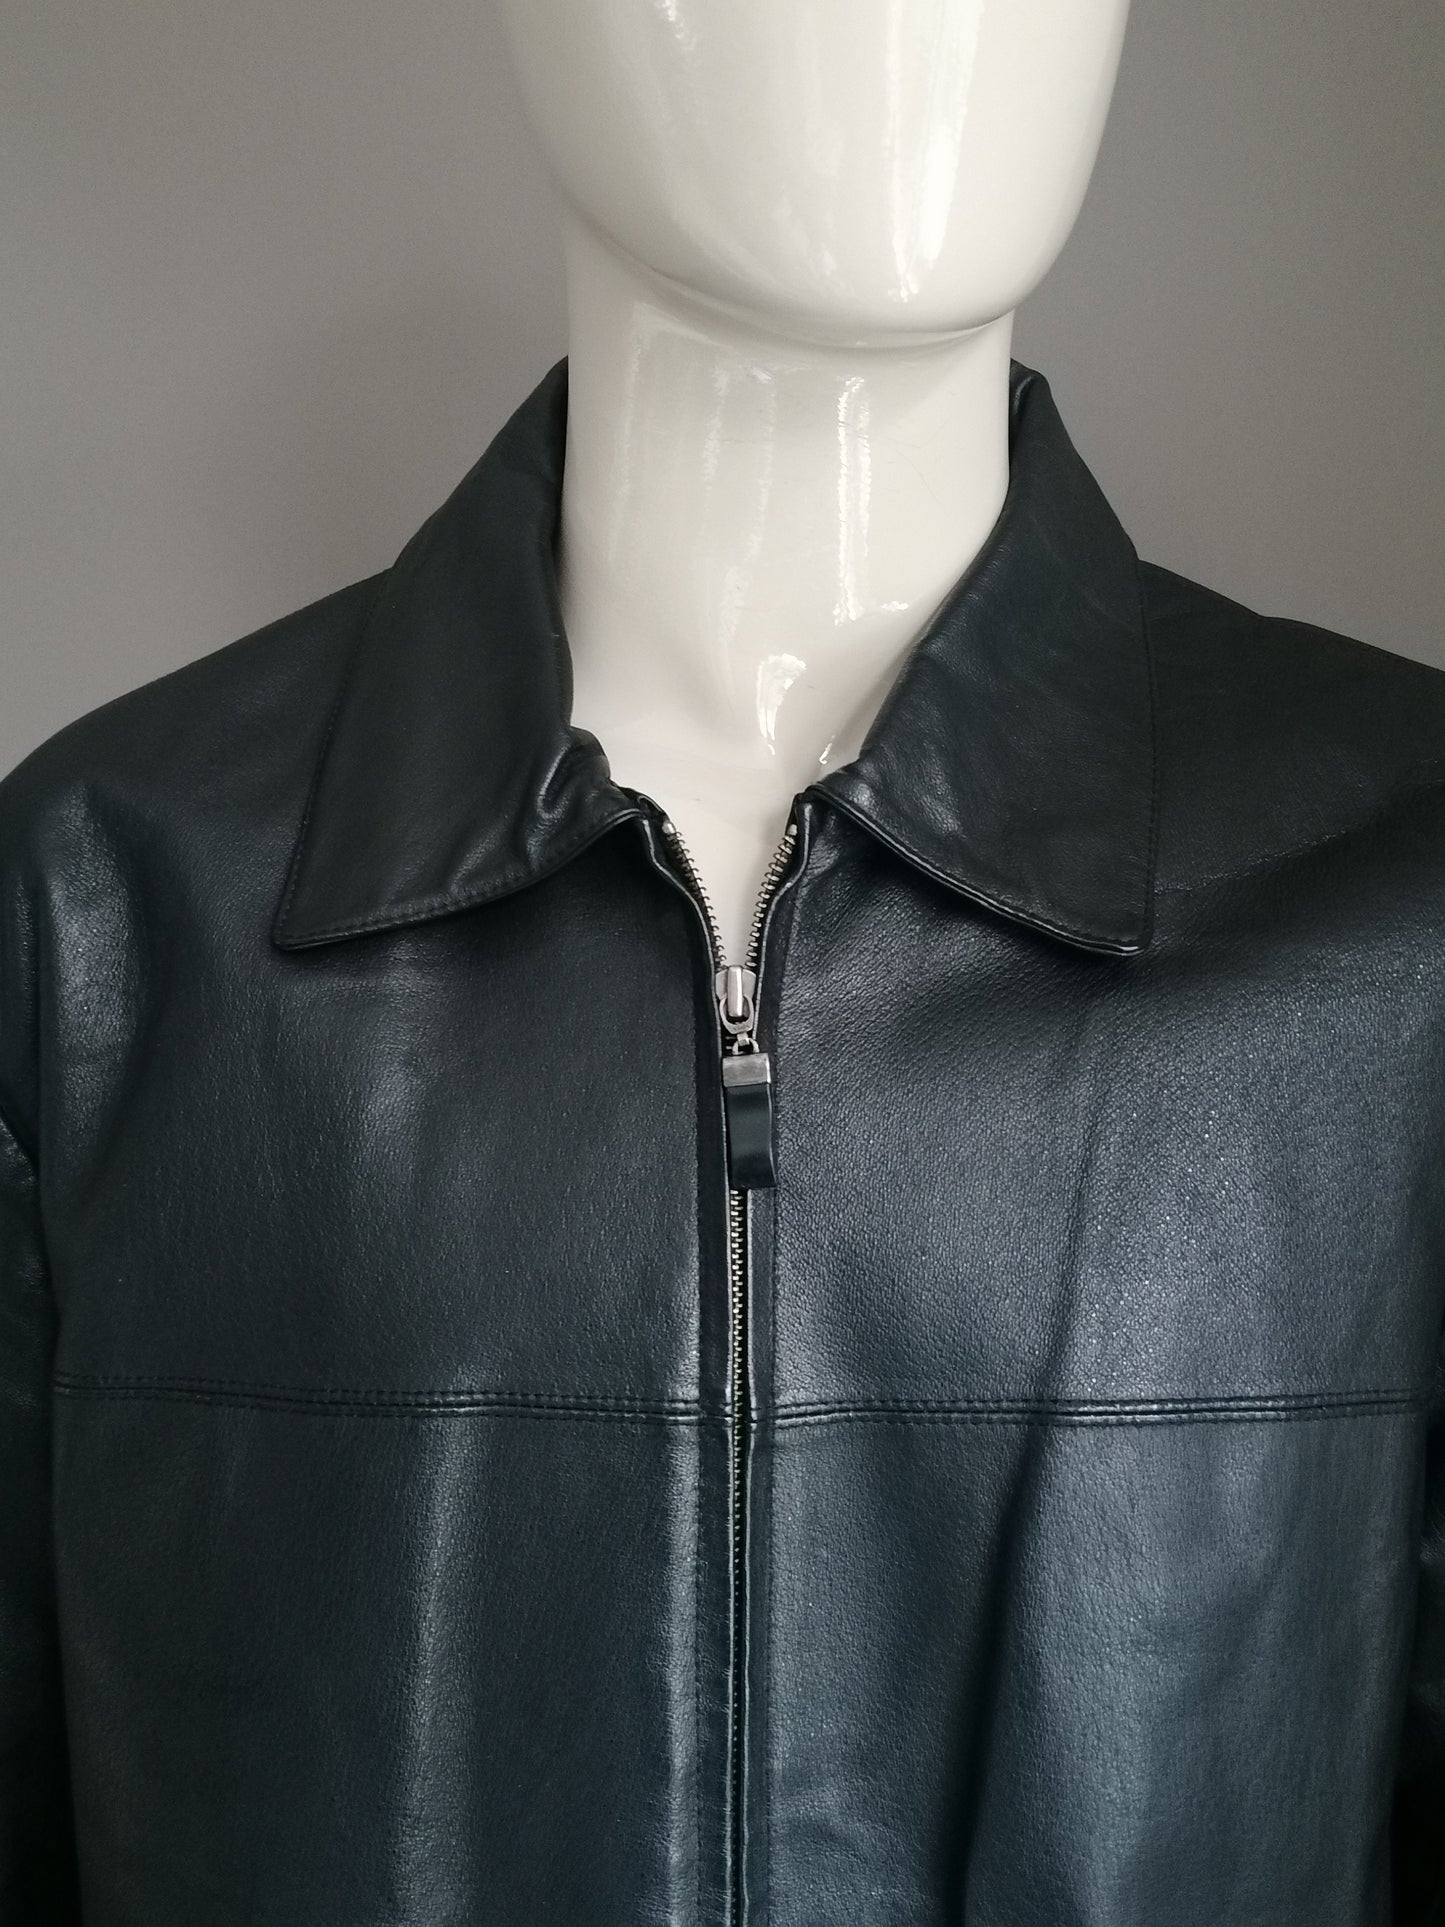 Angelo Litrico leather jacket / jacket. Black colored. Size XL.